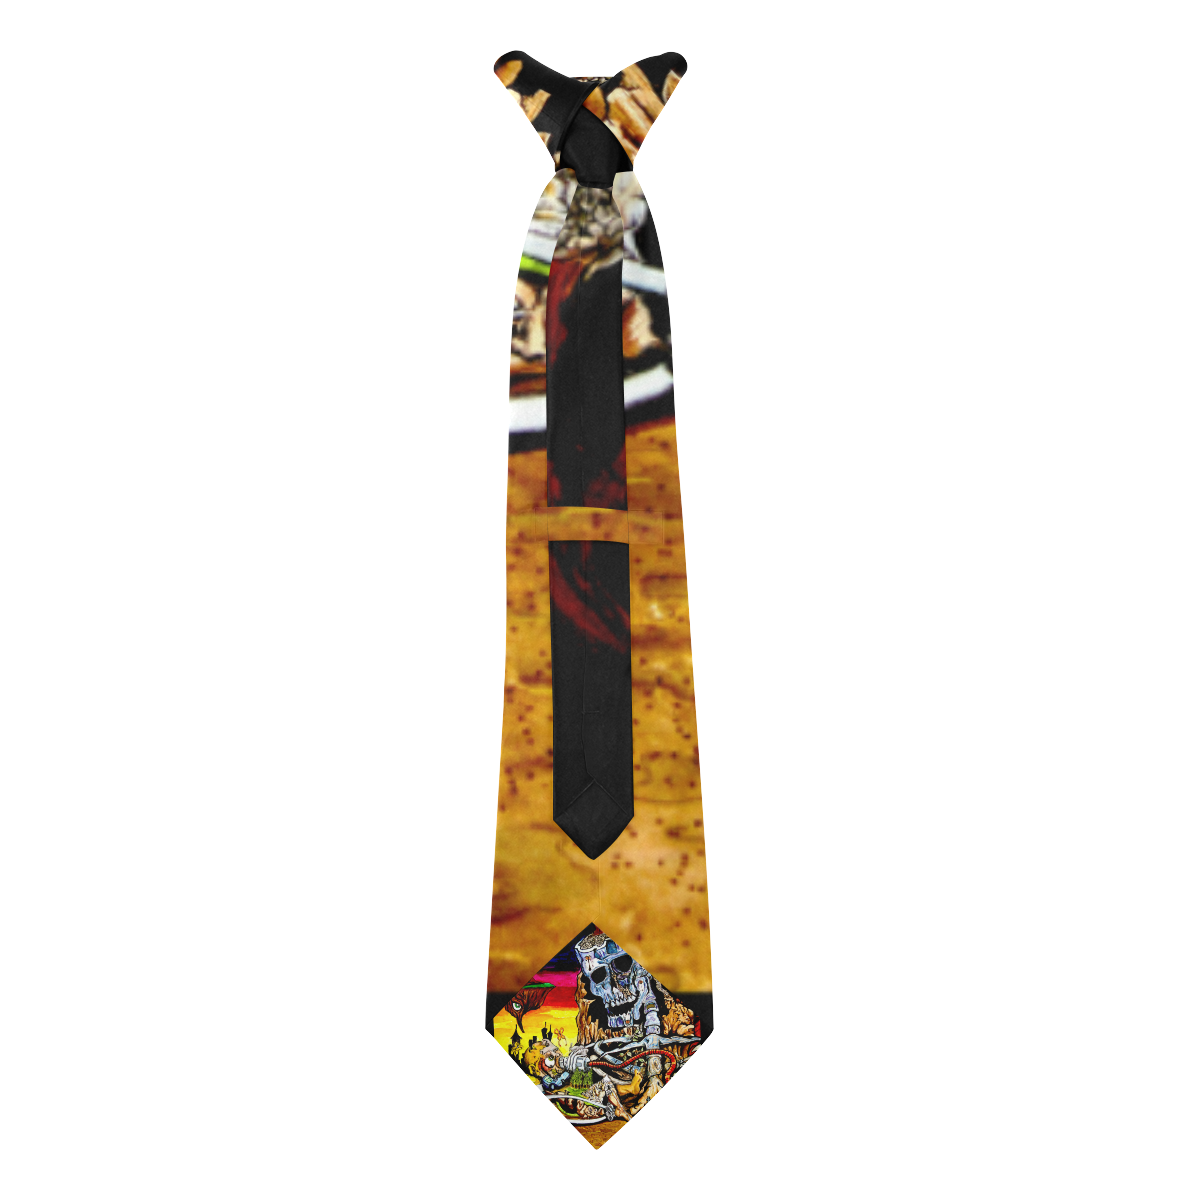 Cycle of Birth And Death Ties Custom Peekaboo Tie with Hidden Picture